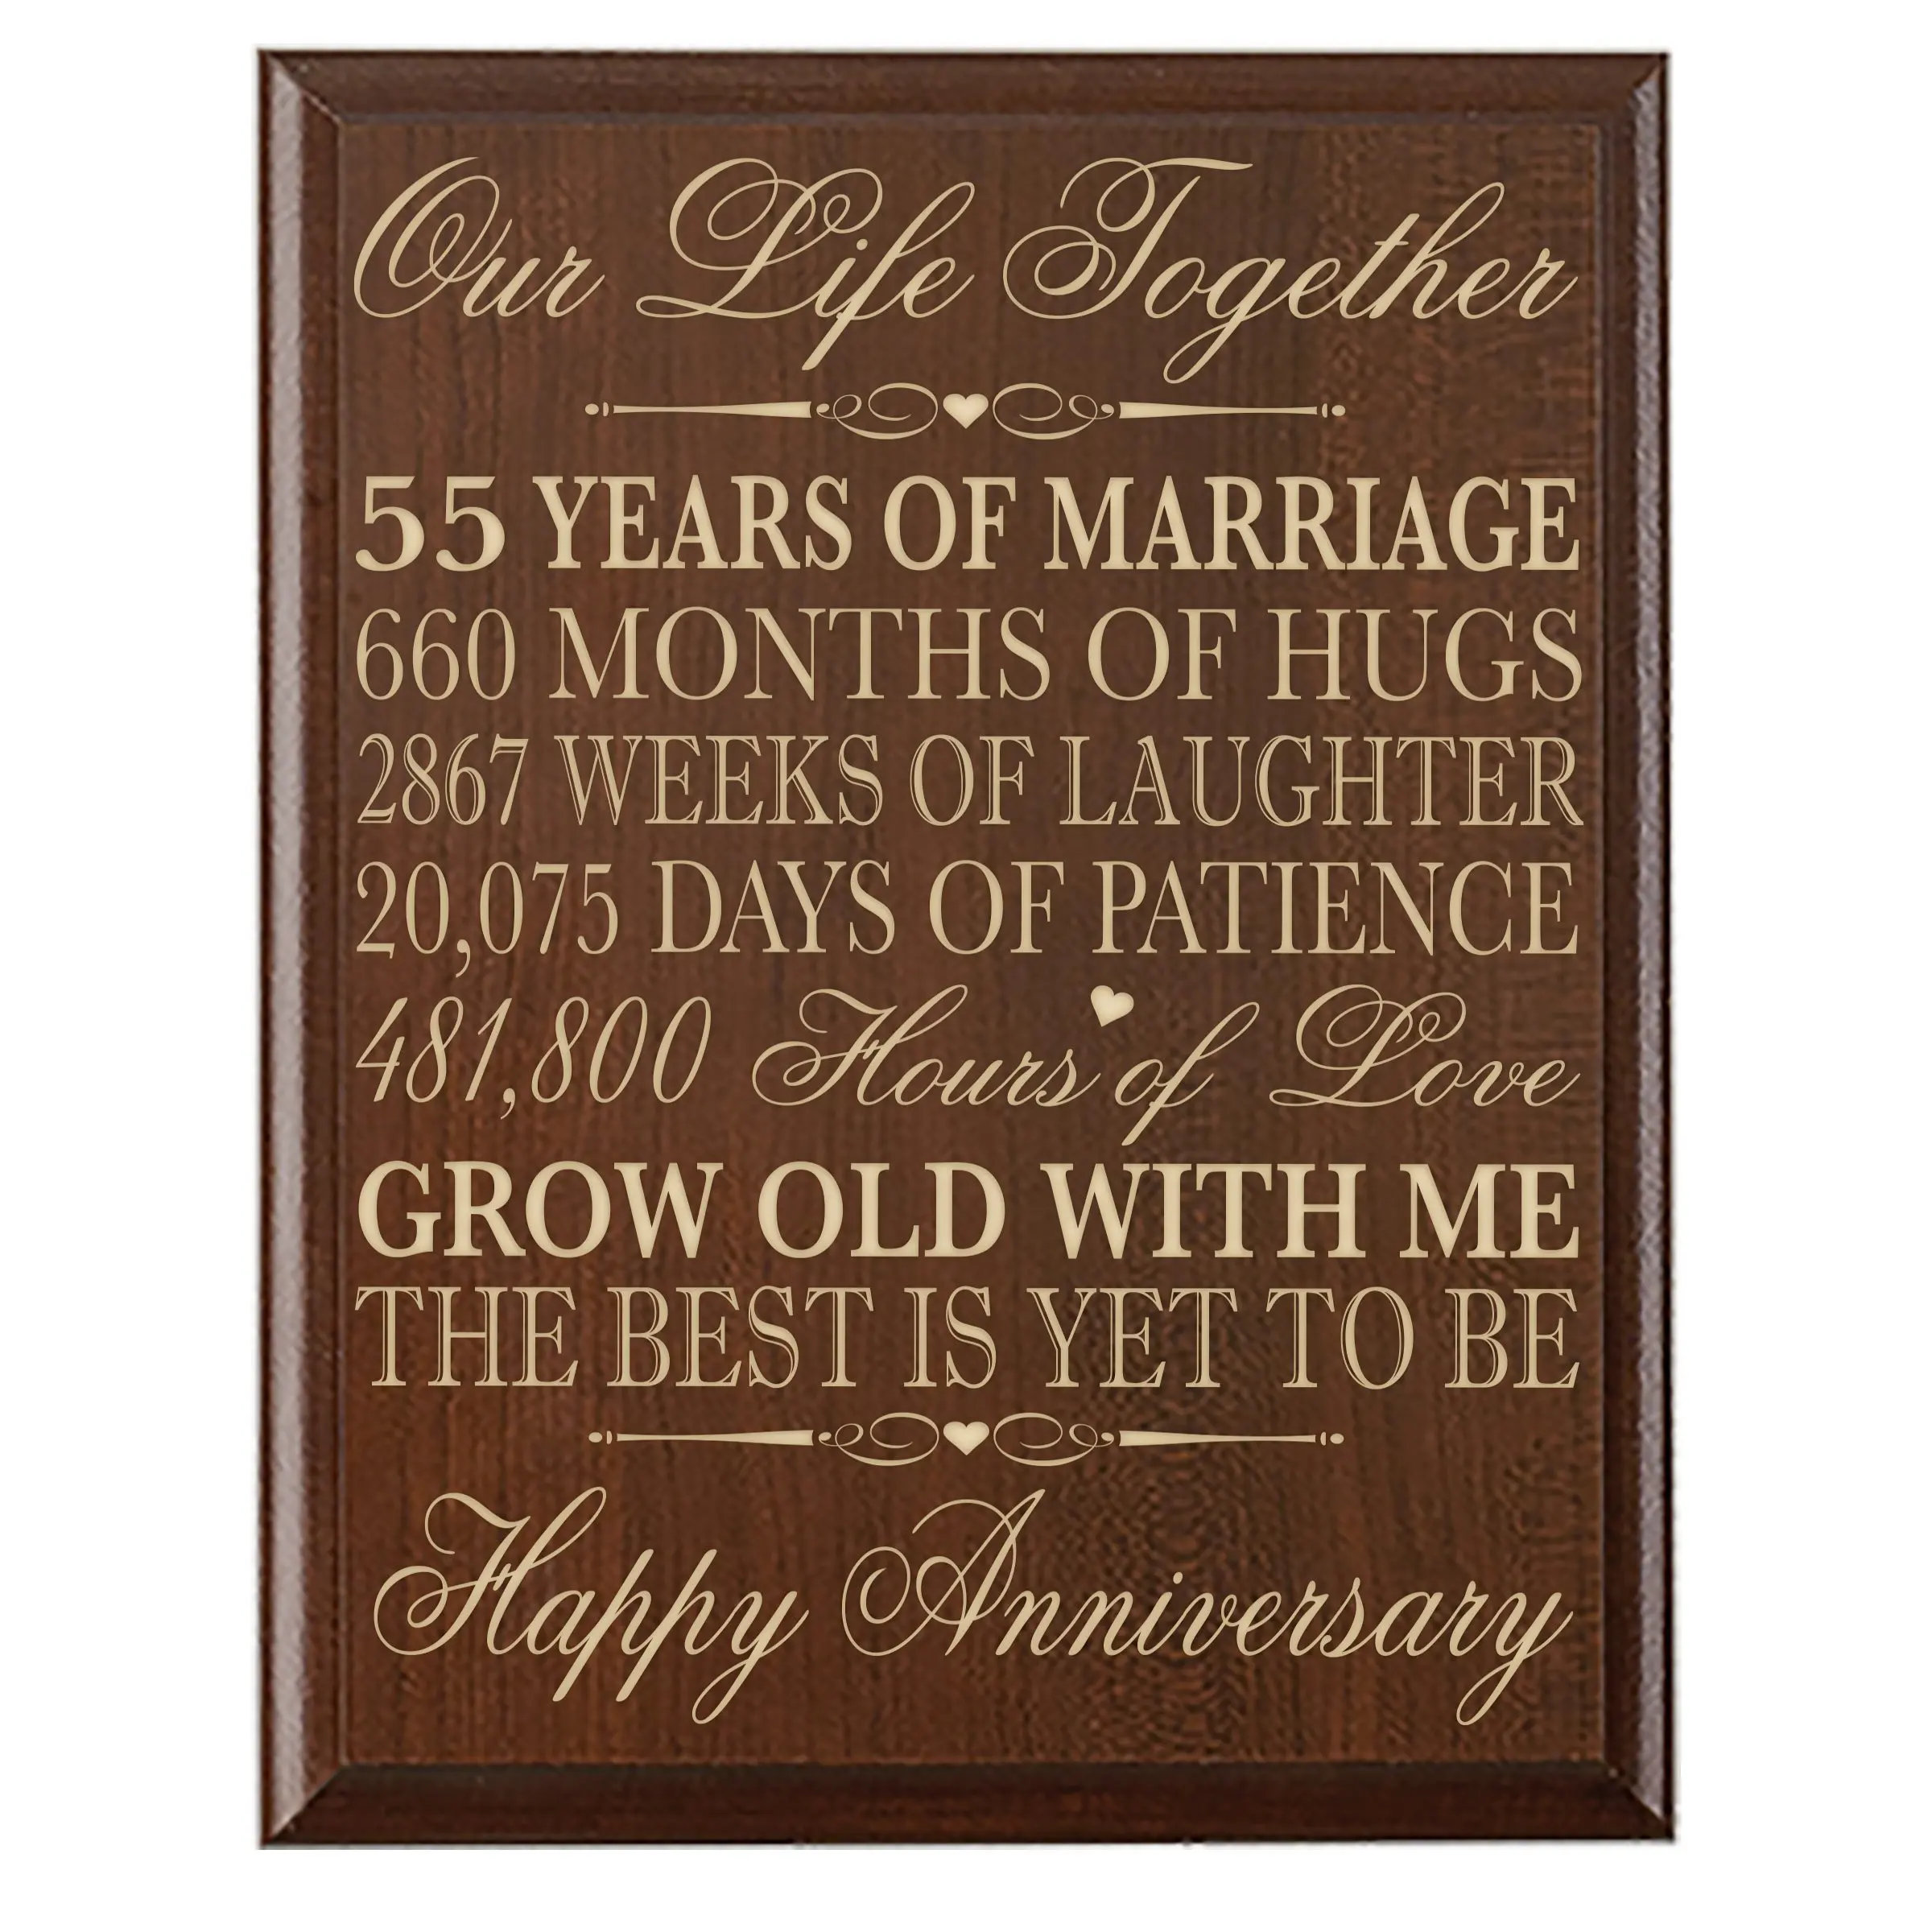 Buy 55th Wedding Anniversary Wall Plaque Gifts for Couple, 55th